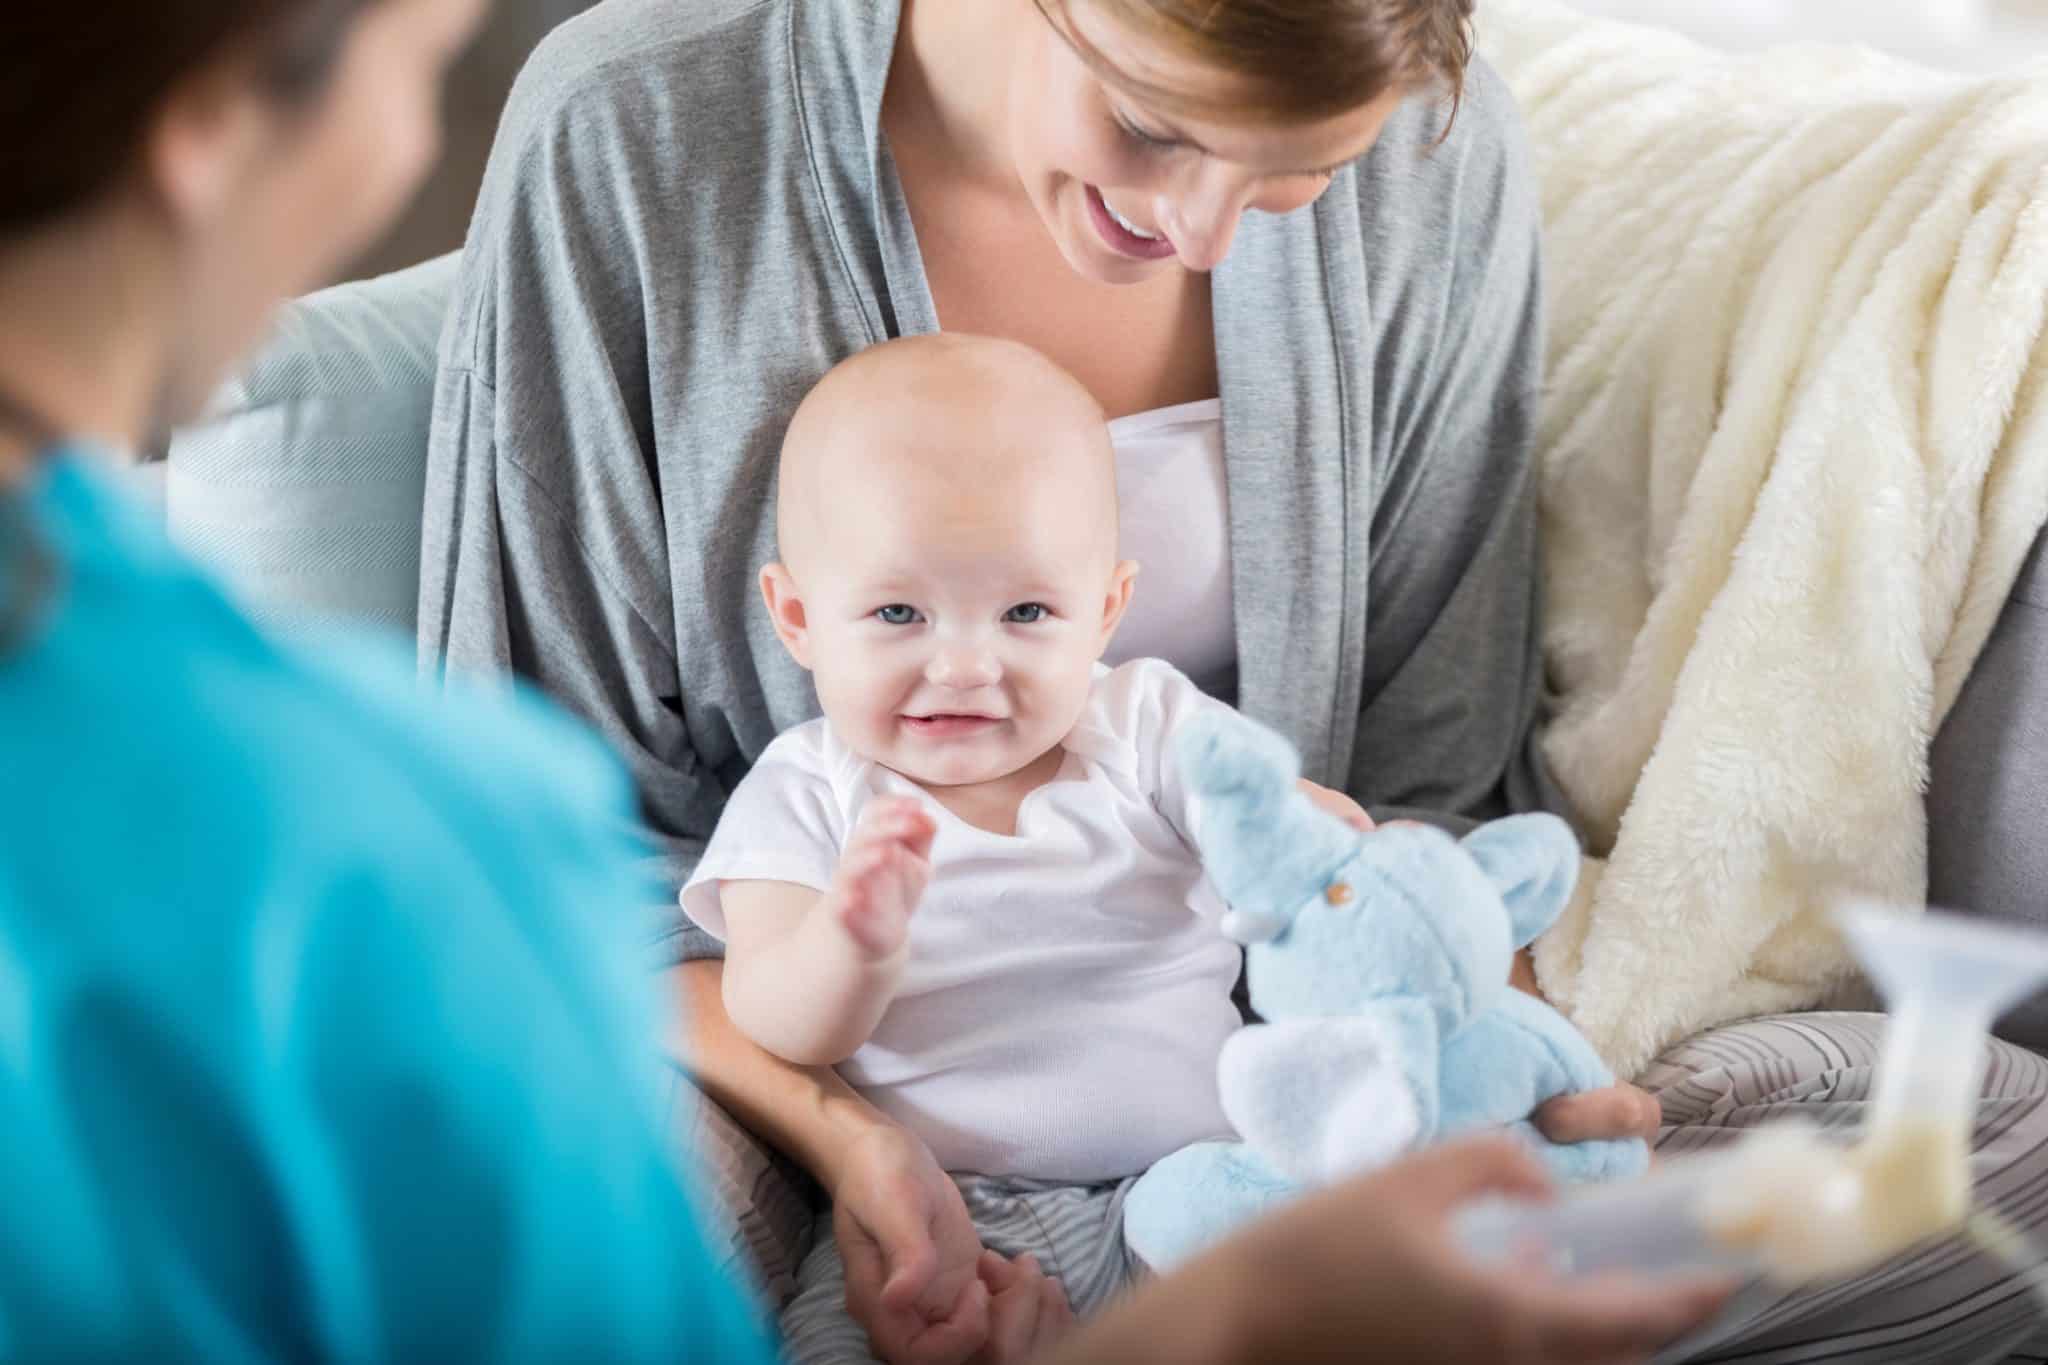 mother holding infant and asking questions to a lactation consultant